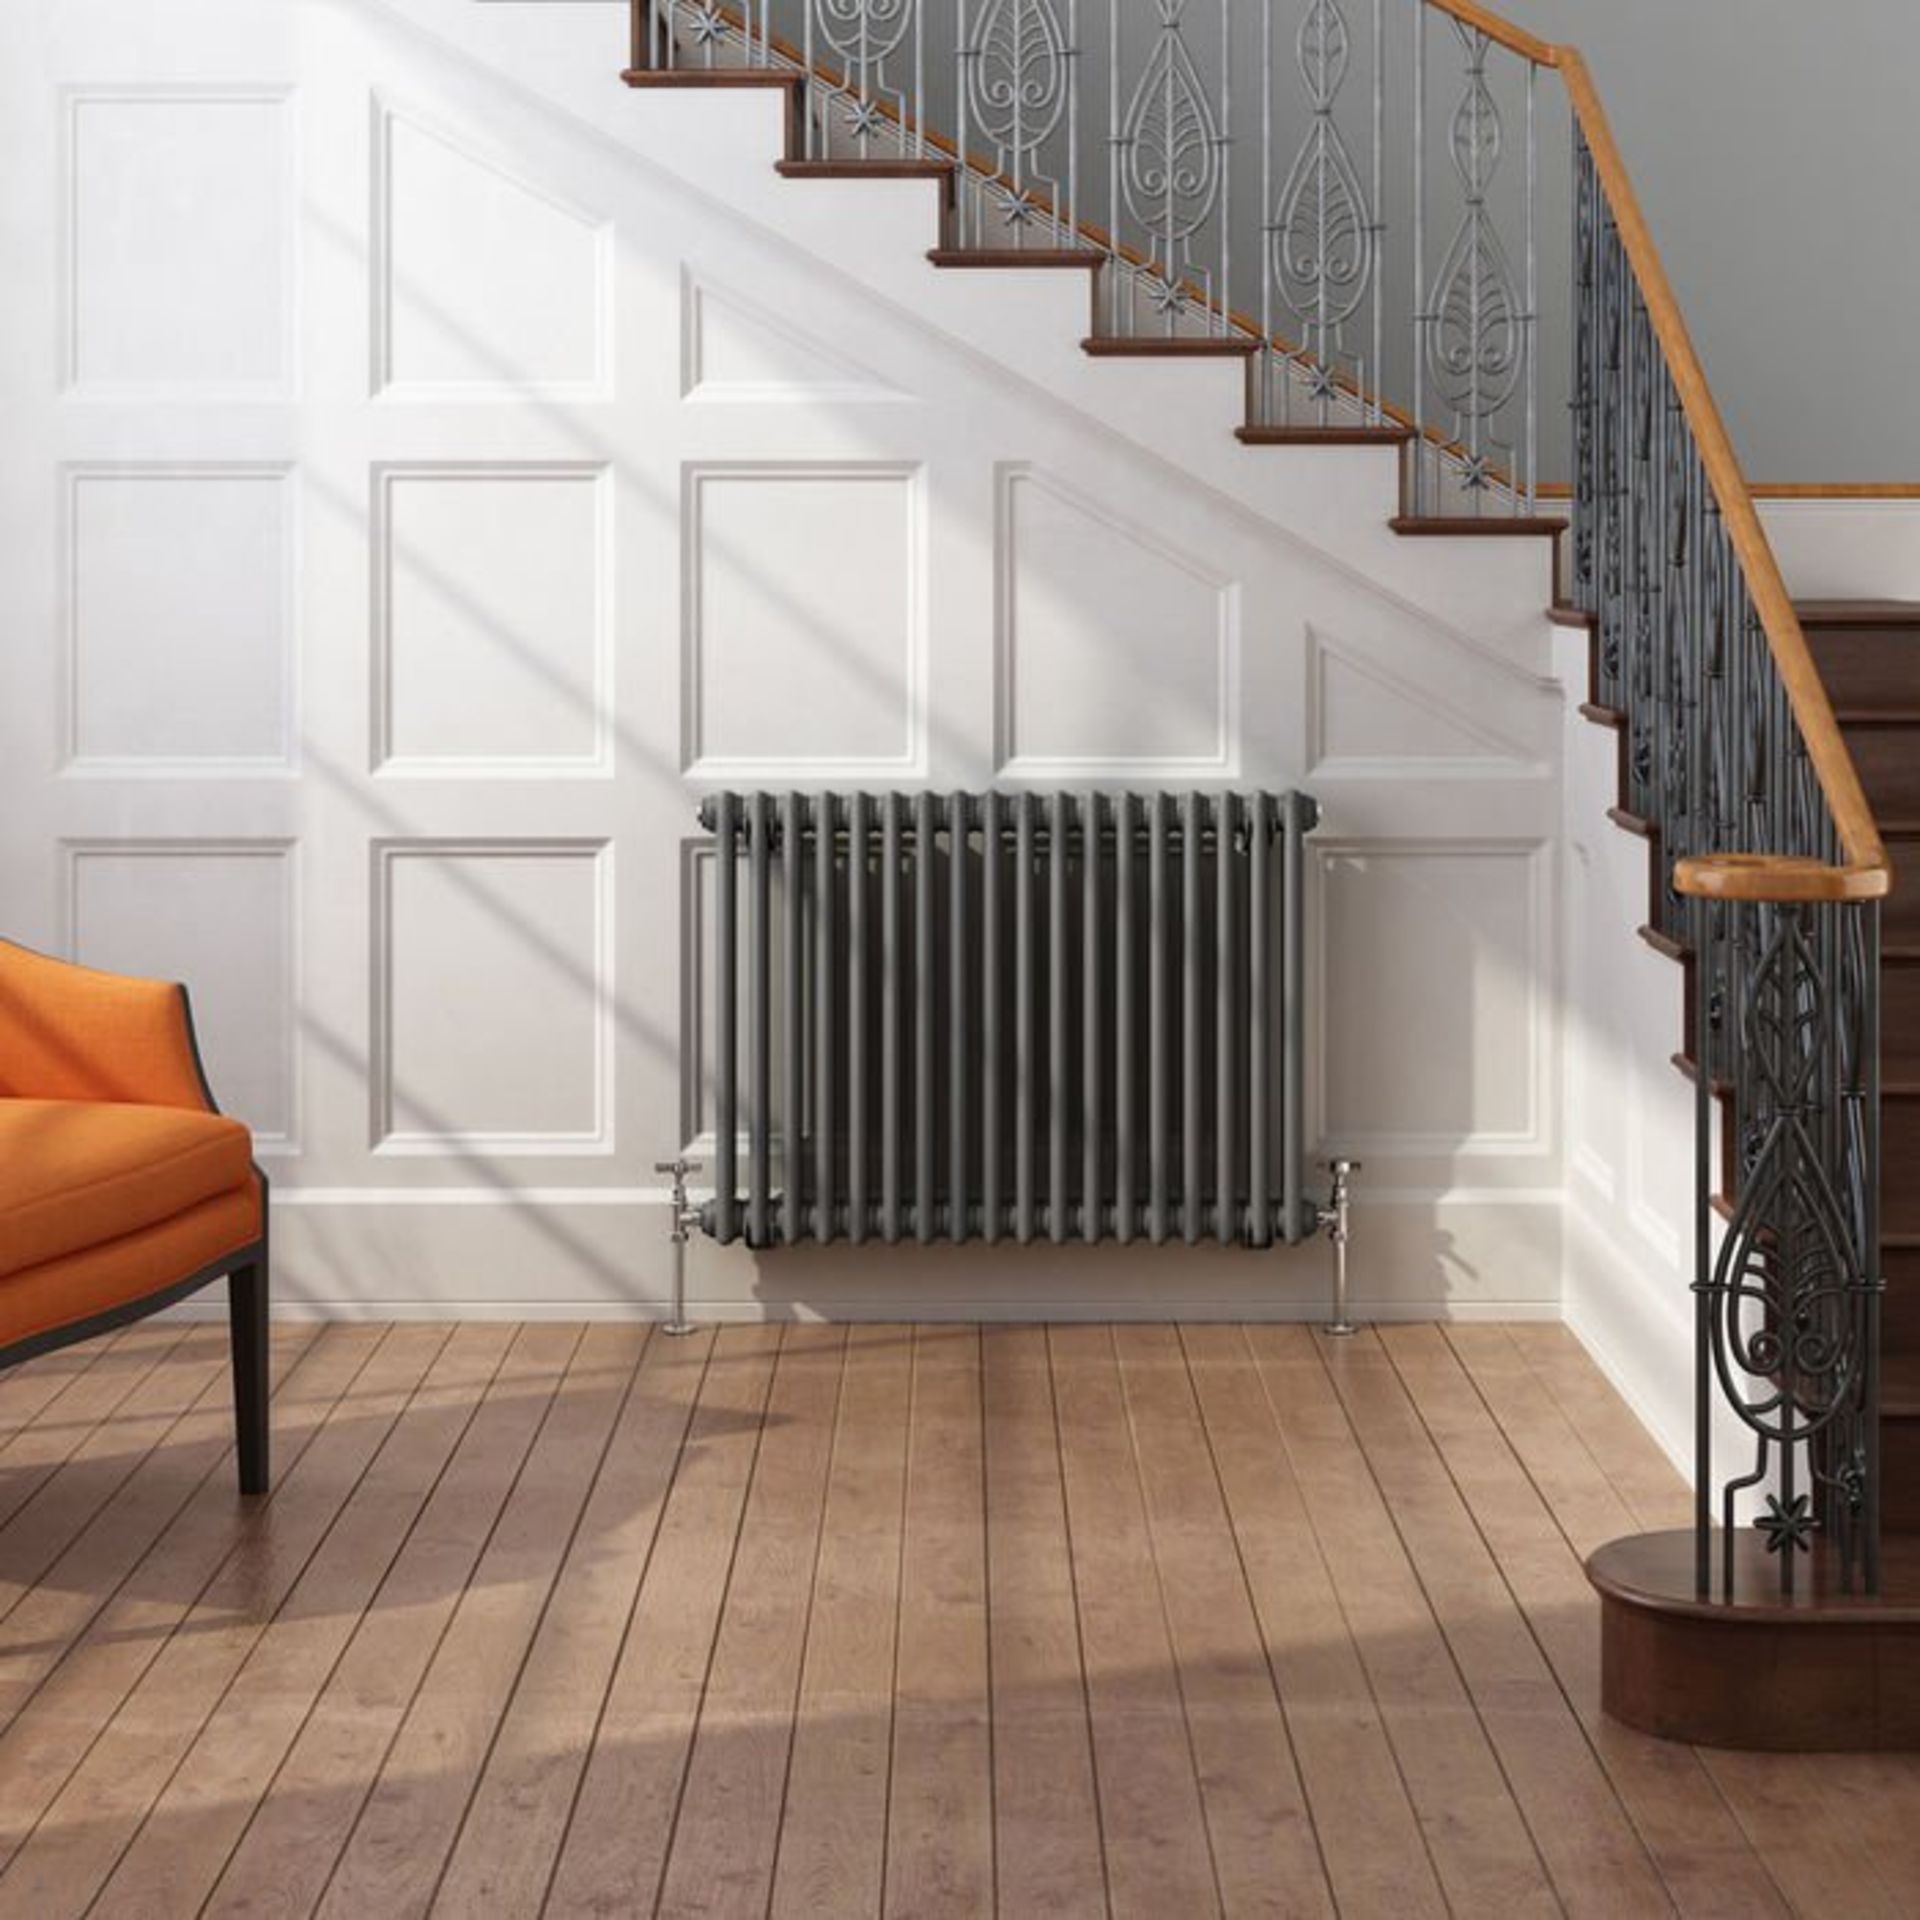 (S83) 600x828mm Anthracite Double Panel Horizontal Colosseum Traditional Radiator RRP £447.99 Create - Image 2 of 3